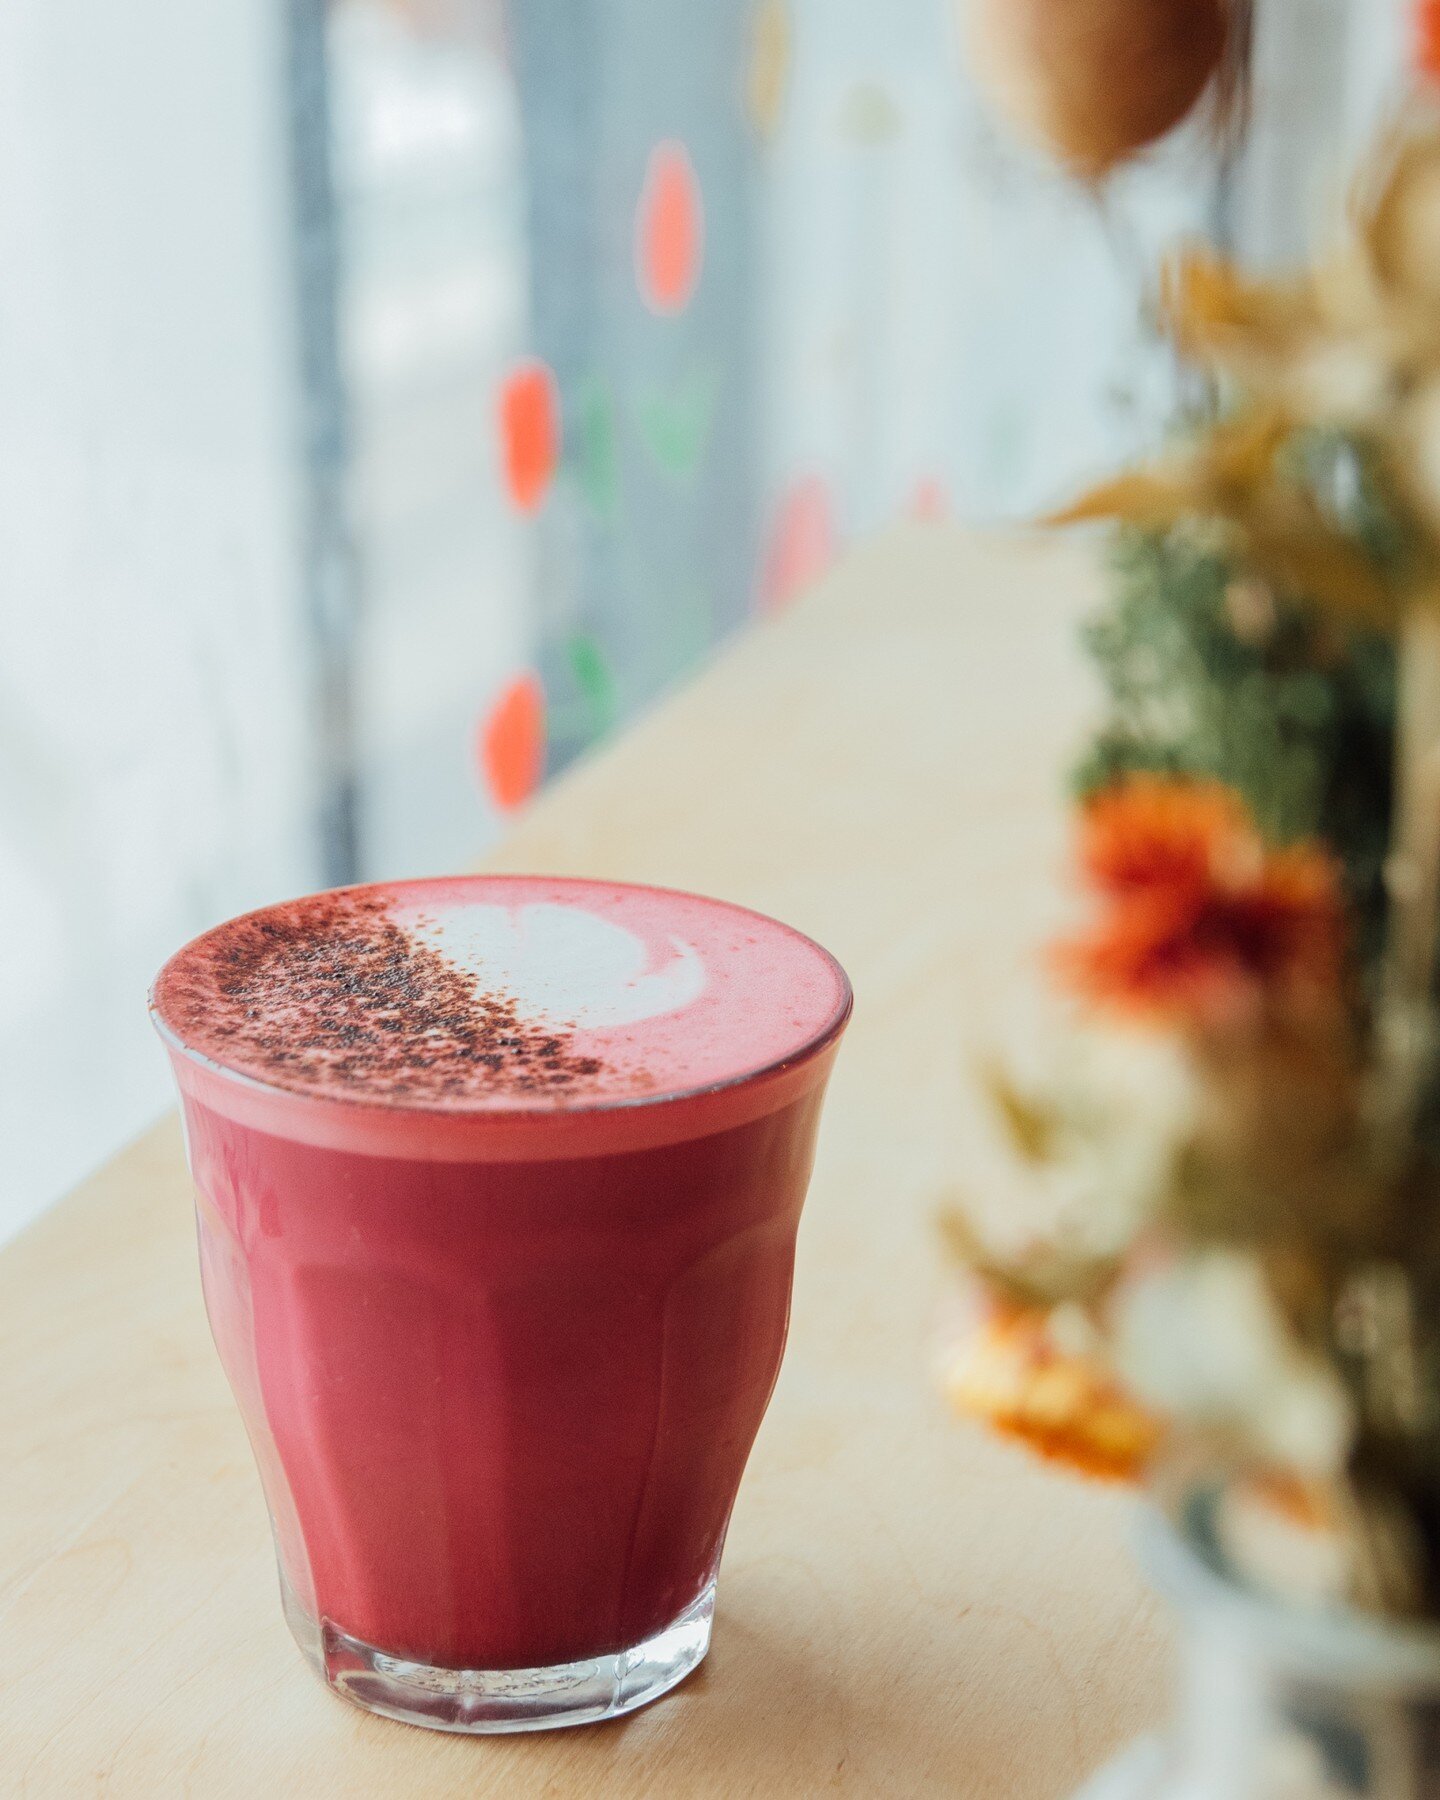 The beetroot latte is still here and delicious as always! A lil earthy, and a lil sweet 💕

We're open until 4.30pm today so come by today and try one...